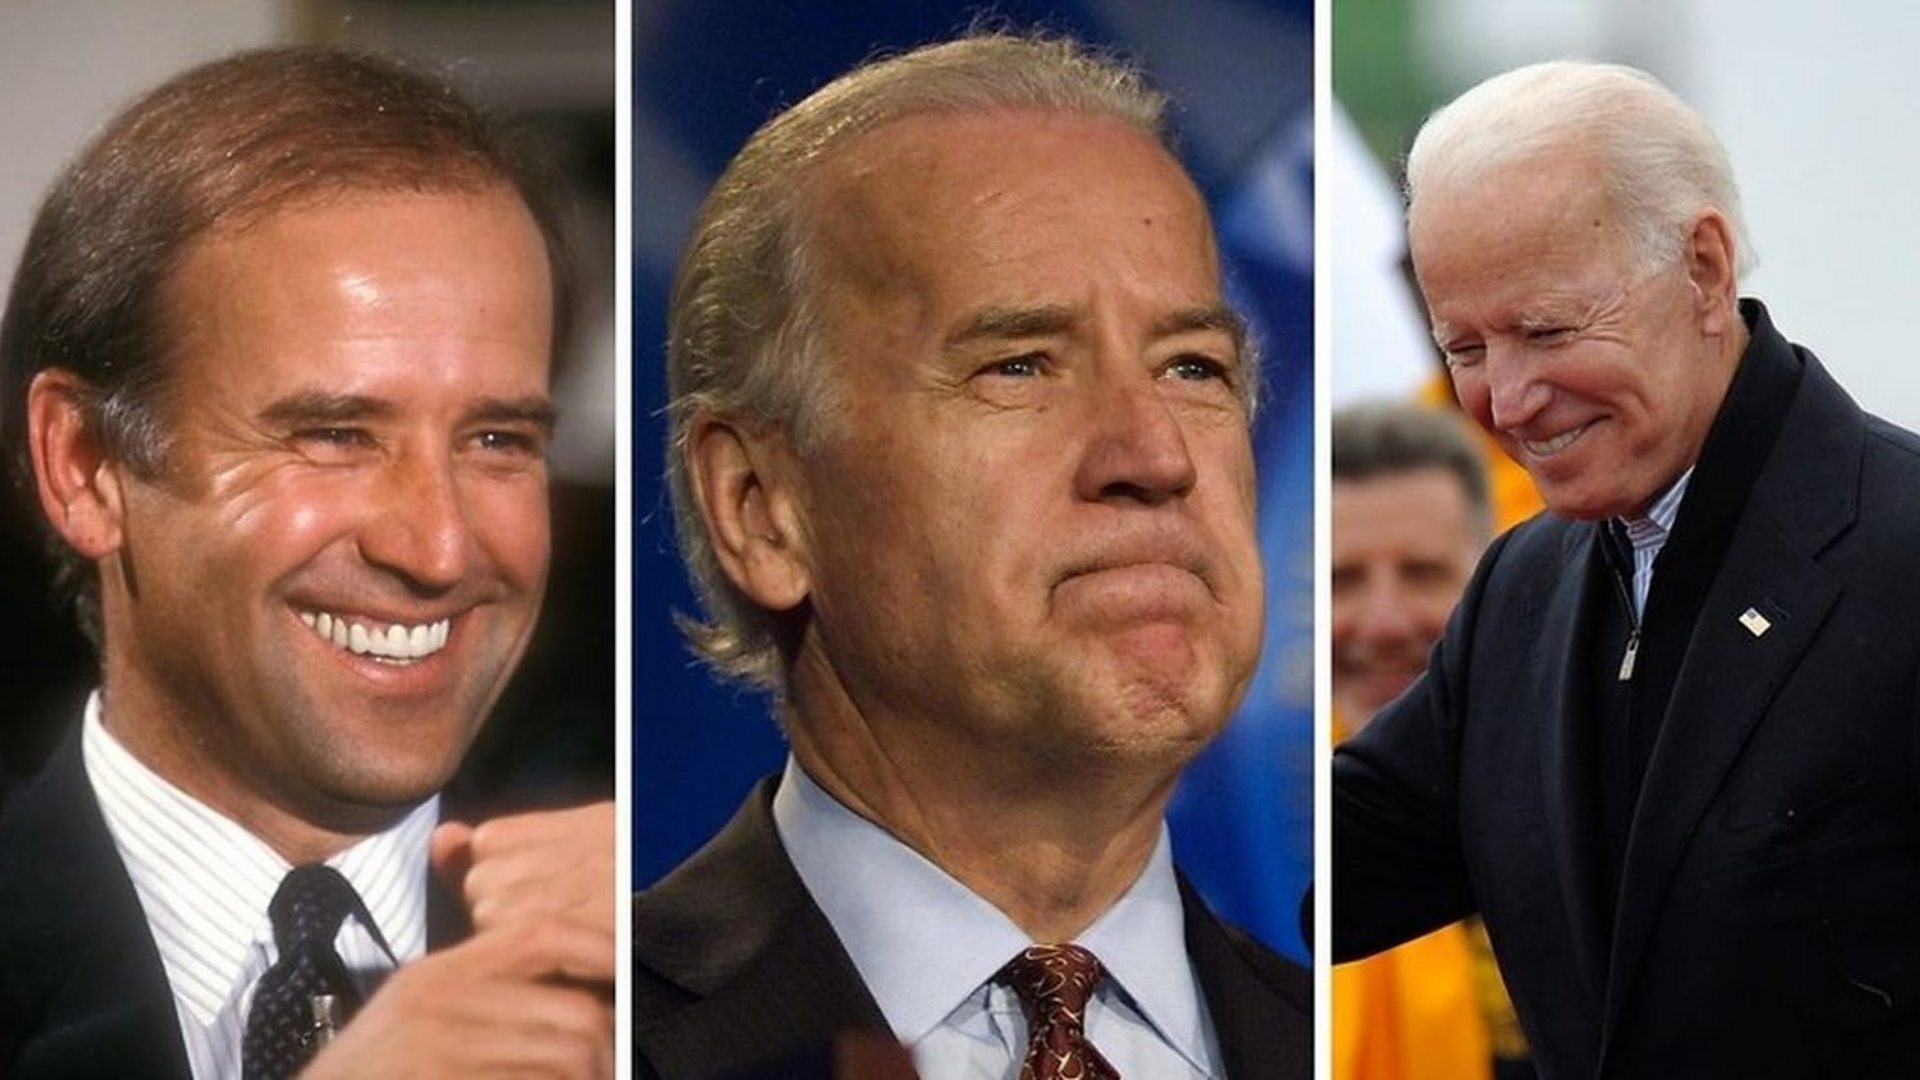 why did joe biden not run for presidency - Biden|President|Joe|Years|Trump|Delaware|Vice|Time|Obama|Senate|States|Law|Age|Campaign|Election|Administration|Family|House|Senator|Office|School|Wife|People|Hunter|University|Act|State|Year|Life|Party|Committee|Children|Beau|Daughter|War|Jill|Day|Facts|Americans|Presidency|Joe Biden|United States|Vice President|White House|Law School|President Trump|Foreign Relations Committee|Donald Trump|President Biden|Presidential Campaign|Presidential Election|Democratic Party|Syracuse University|United Nations|Net Worth|Barack Obama|Judiciary Committee|Neilia Hunter|U.S. Senate|Hillary Clinton|New York Times|Obama Administration|Empty Store Shelves|Systemic Racism|Castle County Council|Archmere Academy|U.S. Senator|Vice Presidency|Second Term|Biden Administration